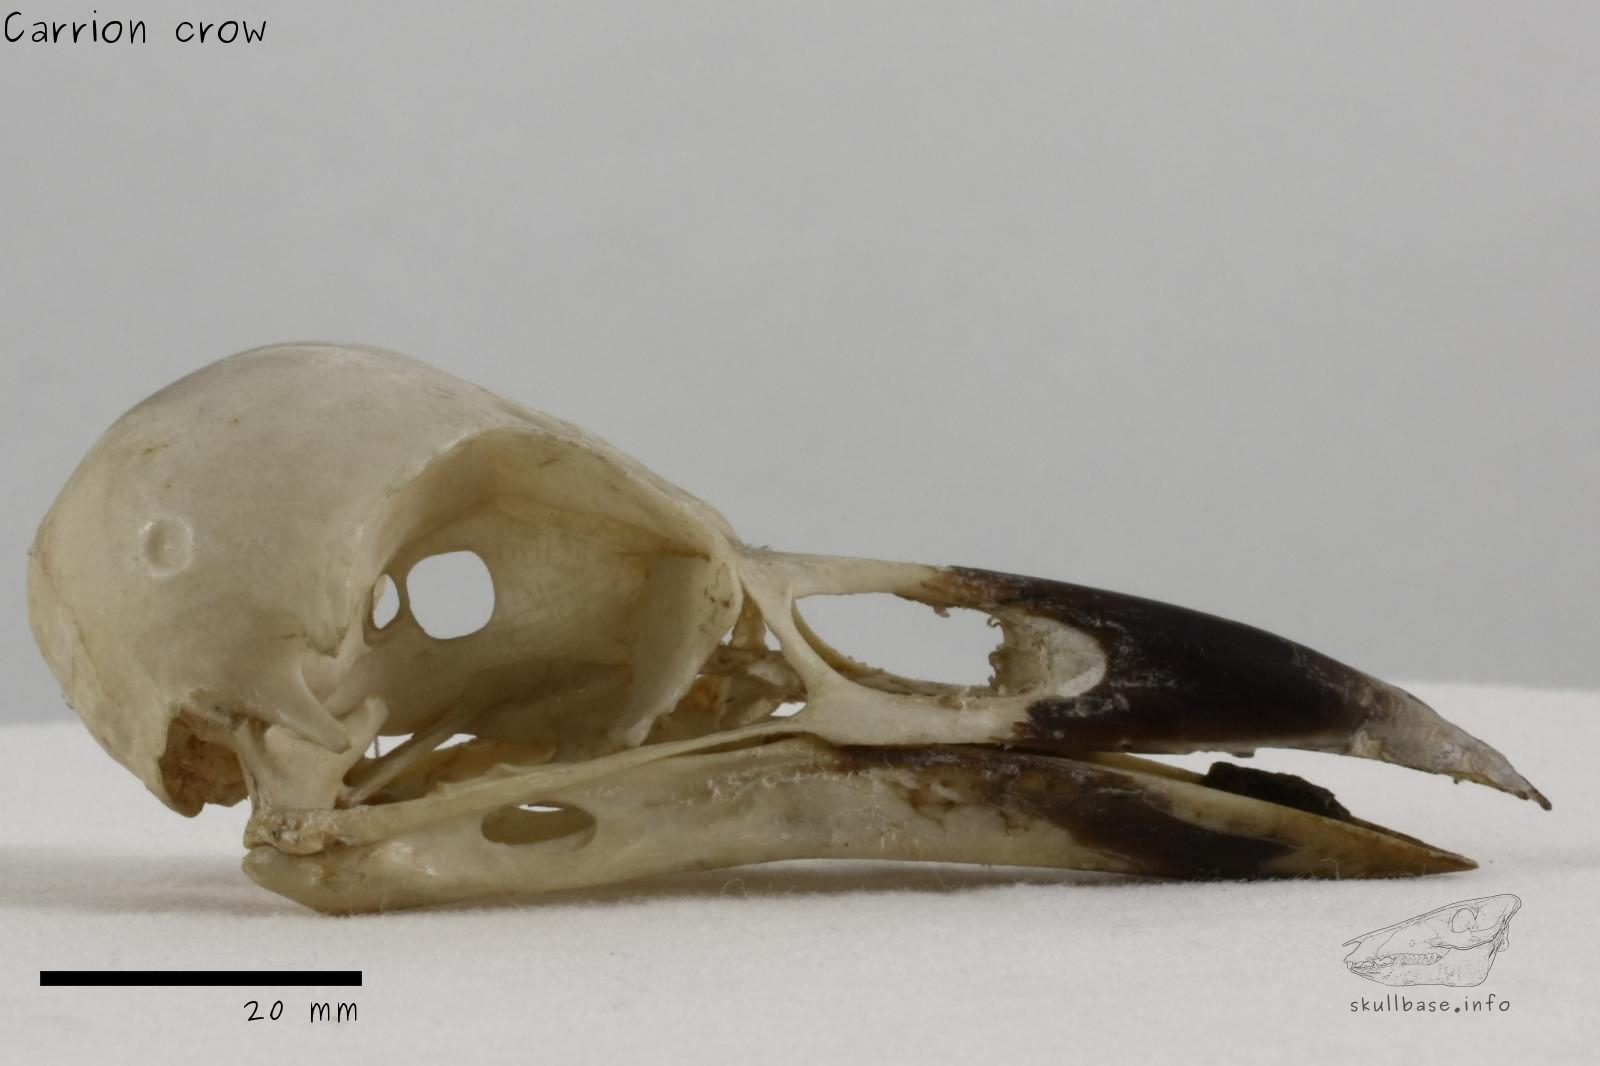 Carrion crow (Corvus corone) skull lateral view